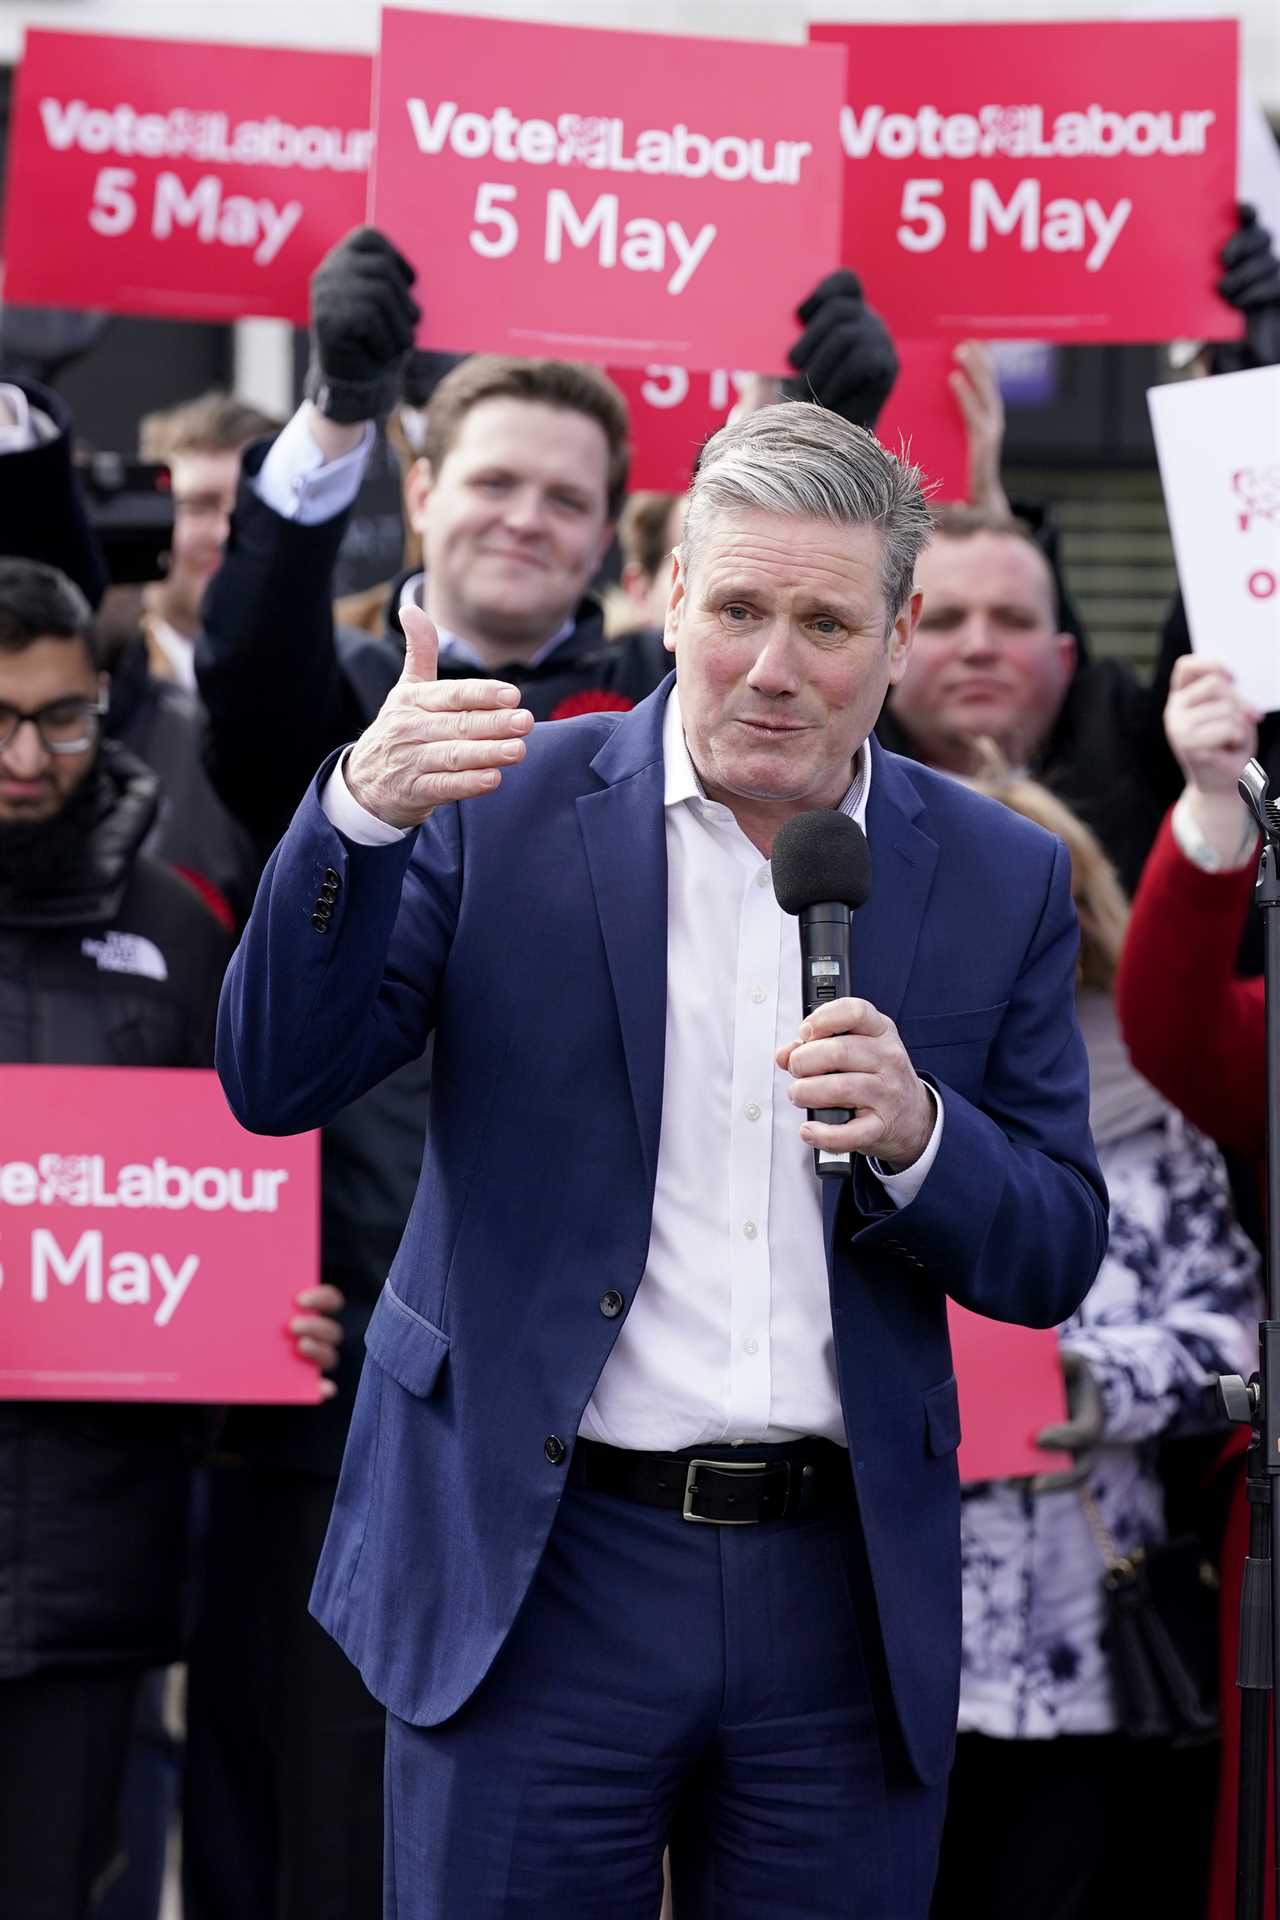 Labour ahead of Tories on law and order among ‘wobbling voters’, shock poll reveals